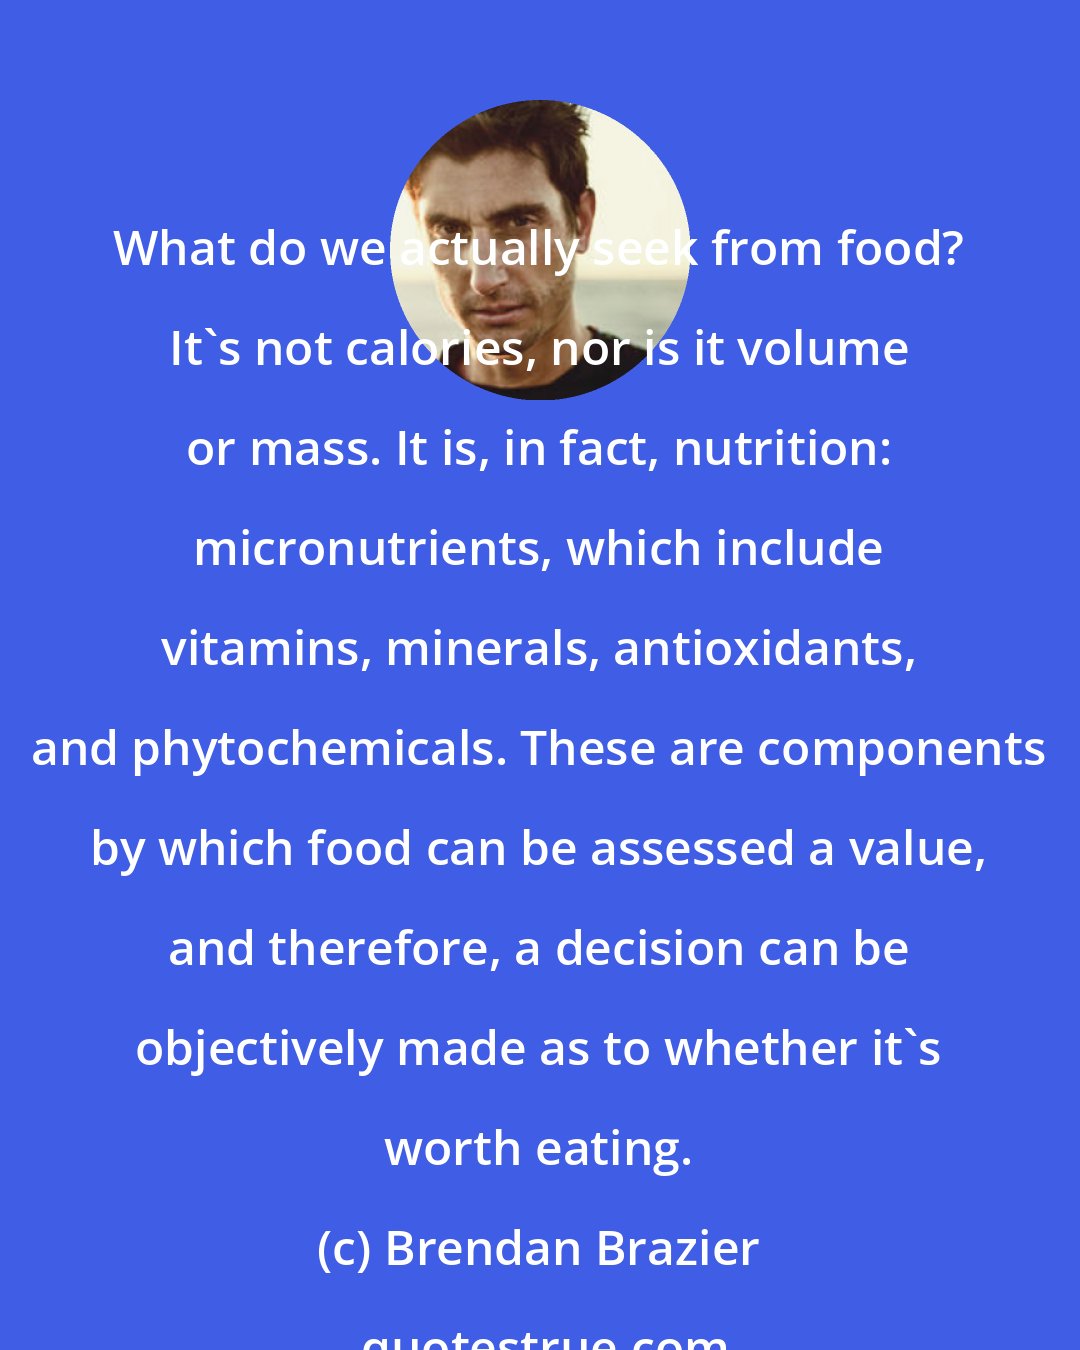 Brendan Brazier: What do we actually seek from food? It's not calories, nor is it volume or mass. It is, in fact, nutrition: micronutrients, which include vitamins, minerals, antioxidants, and phytochemicals. These are components by which food can be assessed a value, and therefore, a decision can be objectively made as to whether it's worth eating.